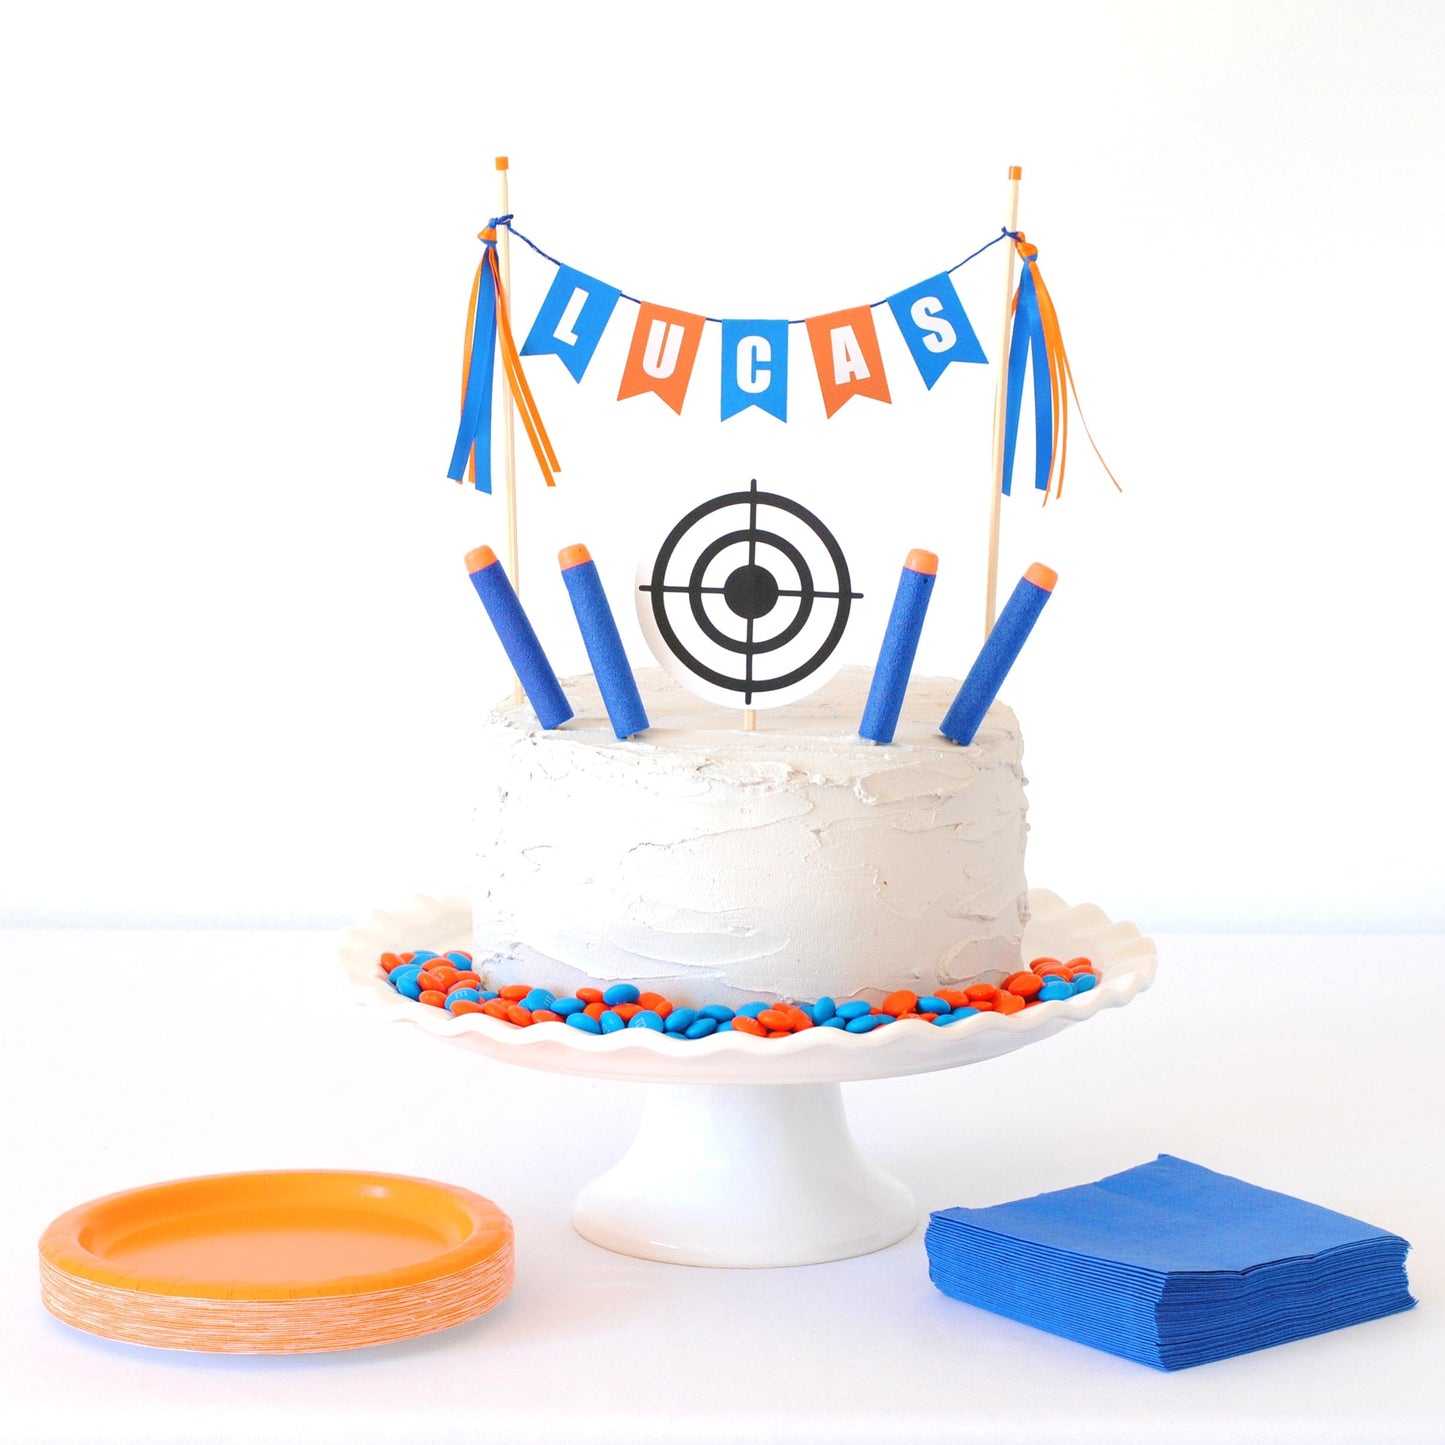 
                  
                    orange and blue personalized name cake topper with round target and nerf-style foam darts
                  
                